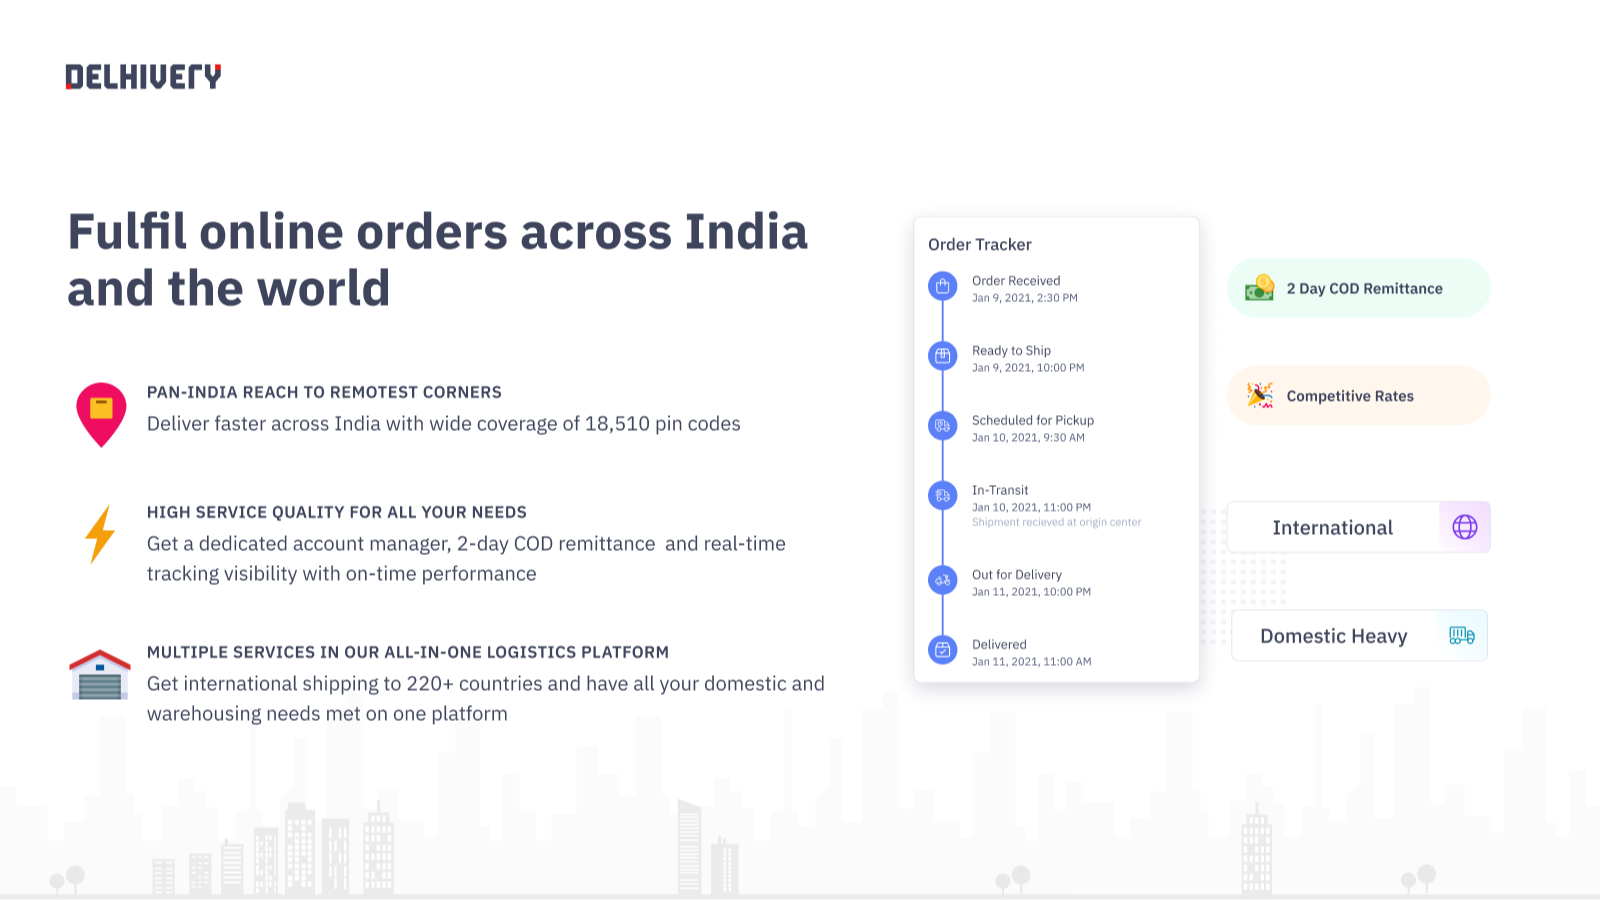 Fulfil online orders across India and the world